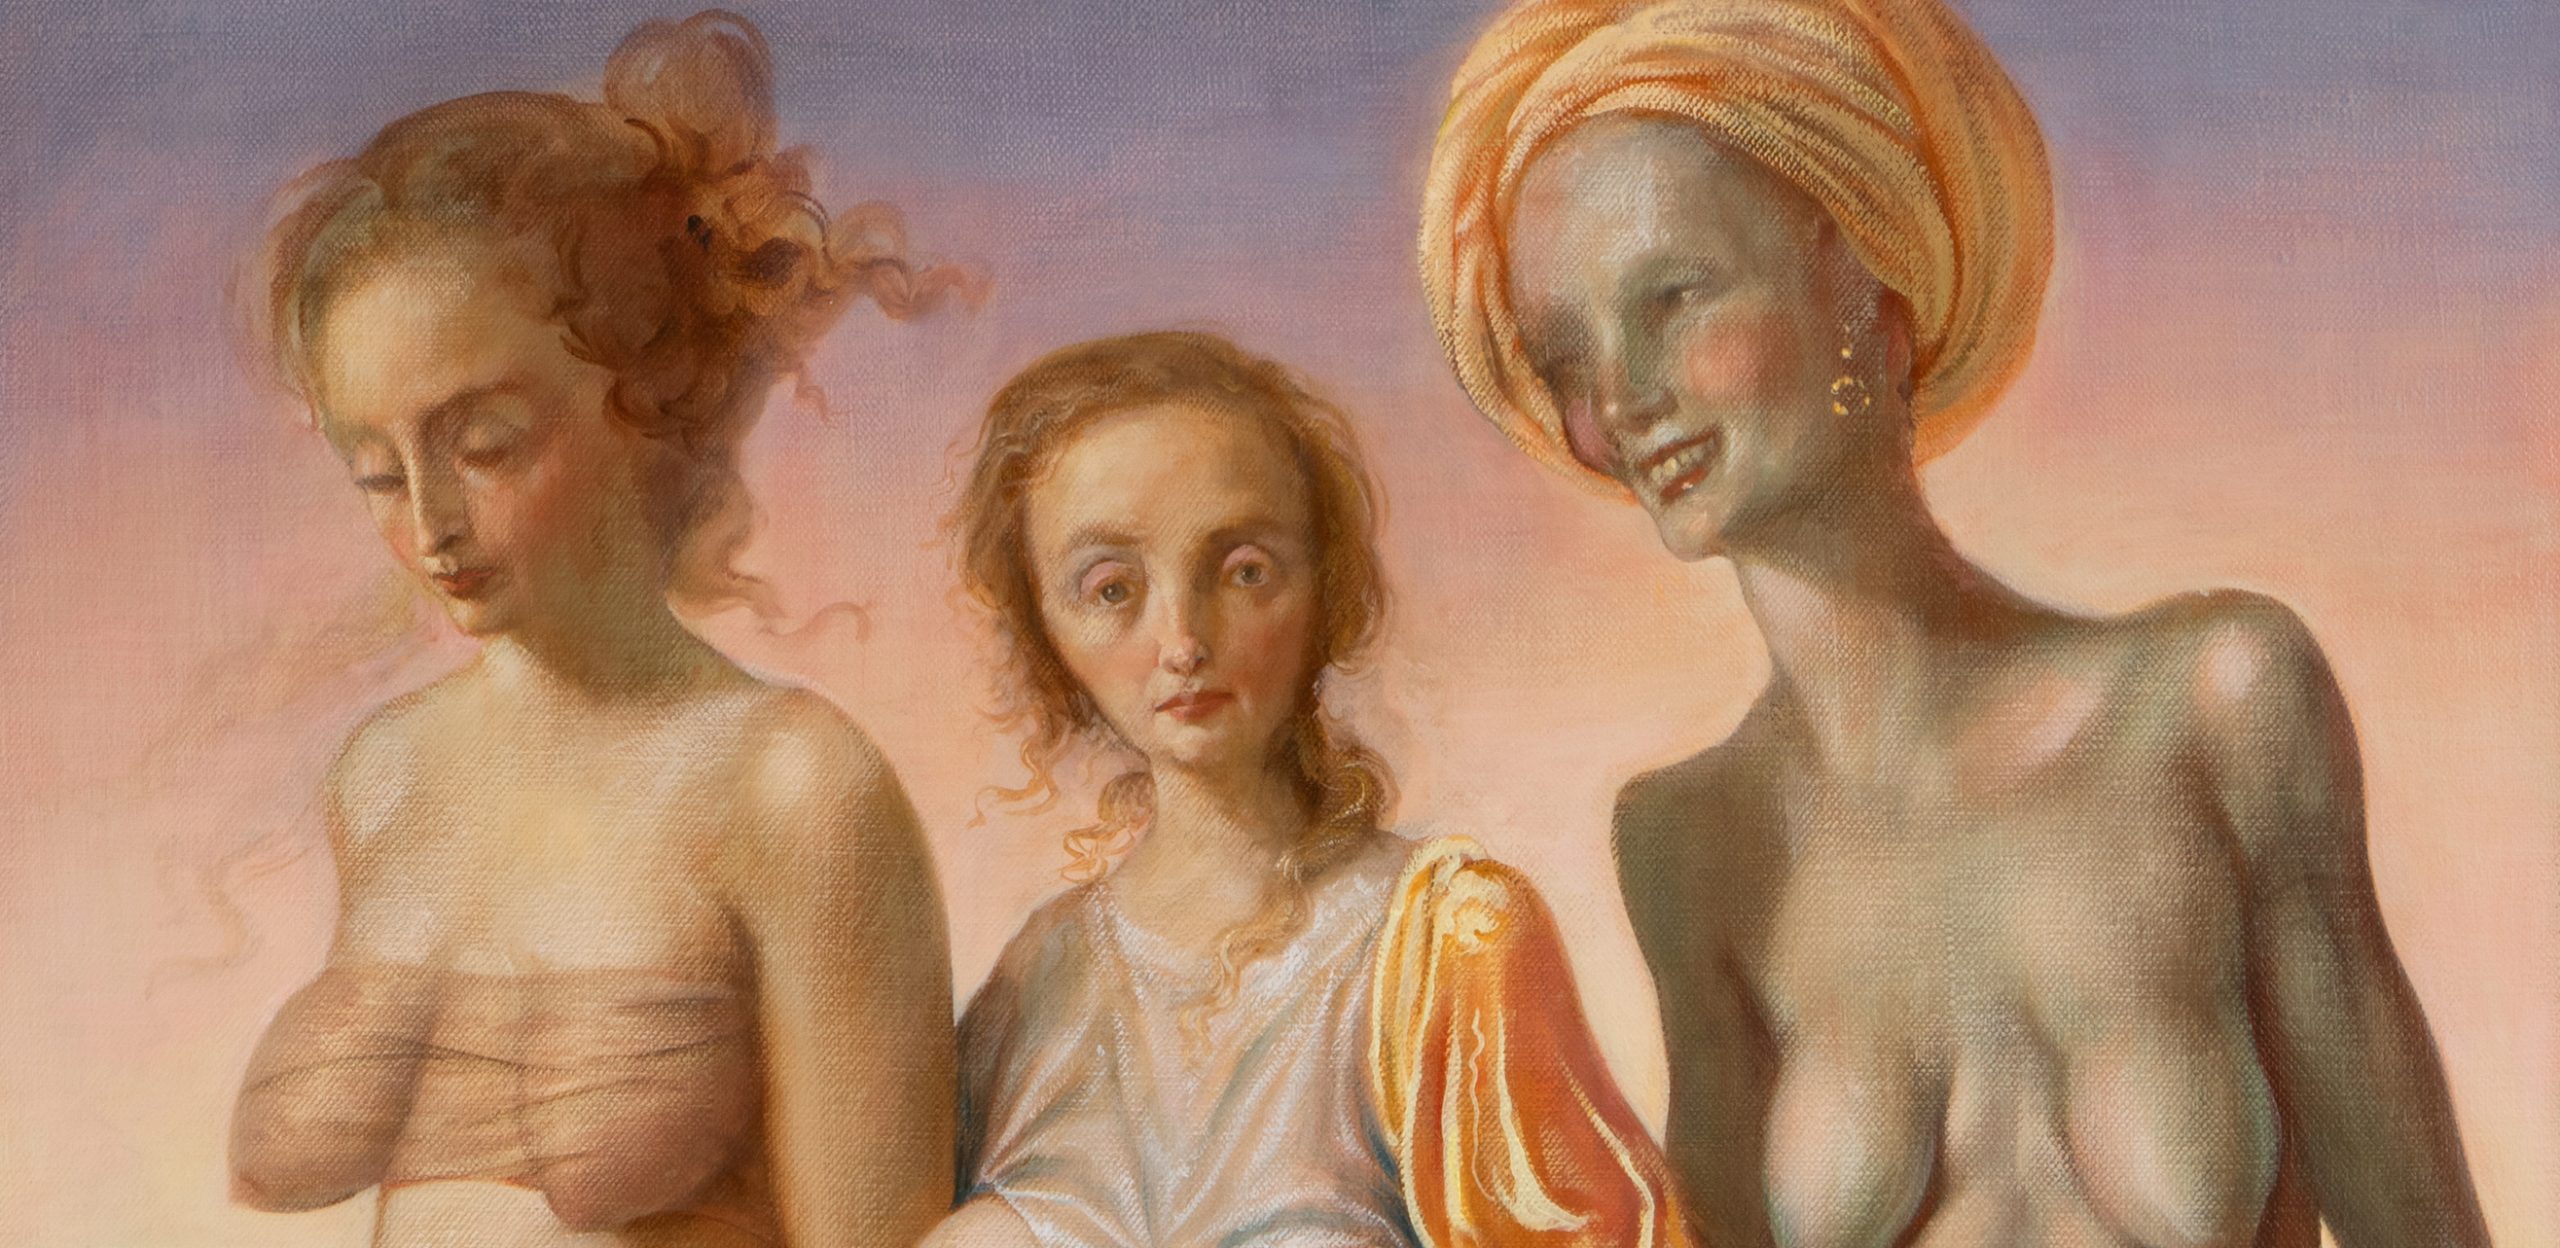 Afghanistan Village Sex Video 18 Years Girls New Video New F - John Currin's Paintings Are Disgusting and Amoral. That's Why They're So  Good - ArtReview